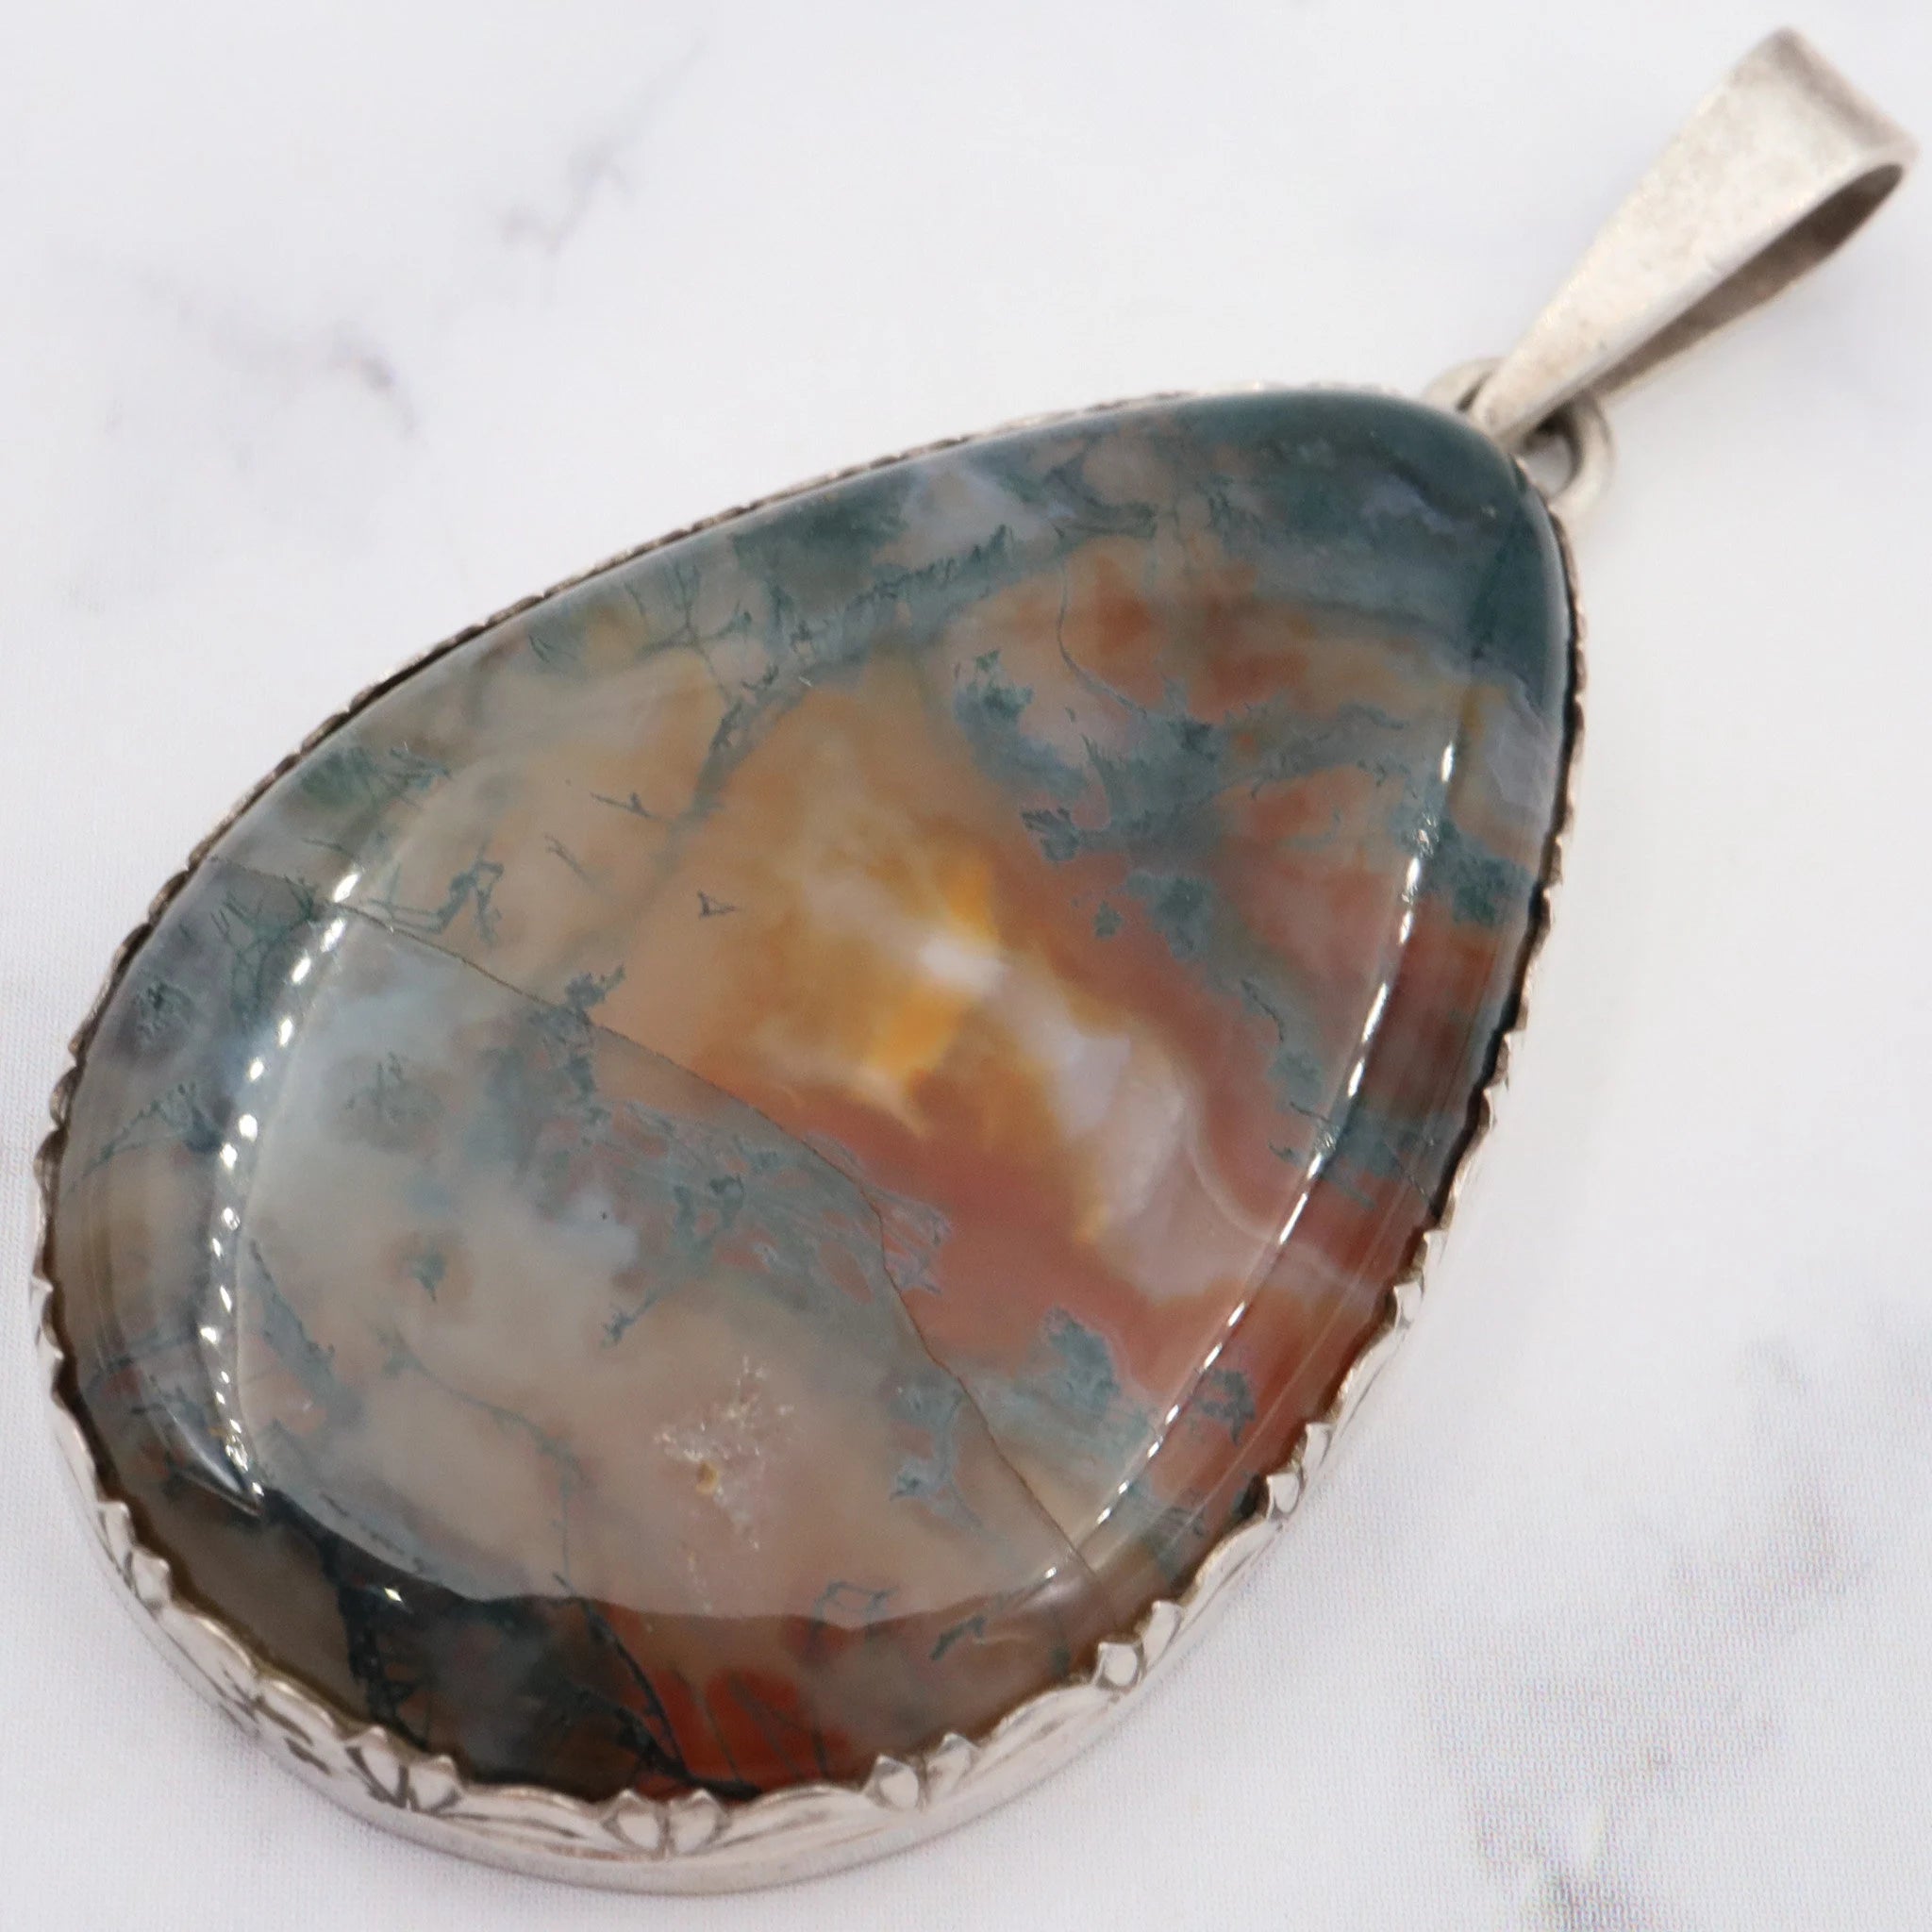 Antique sterling & moss agate pendant